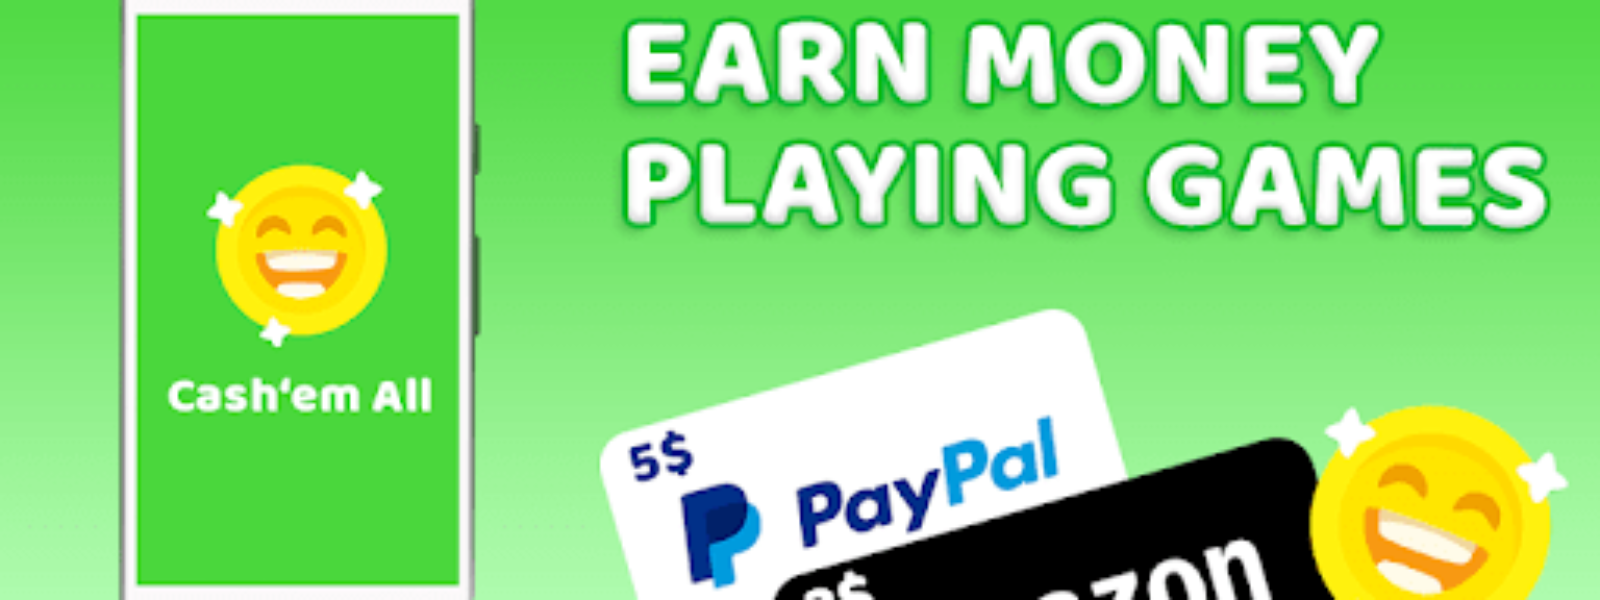 Cash’em All – Play games & win free gift cards pentru Android | iOS